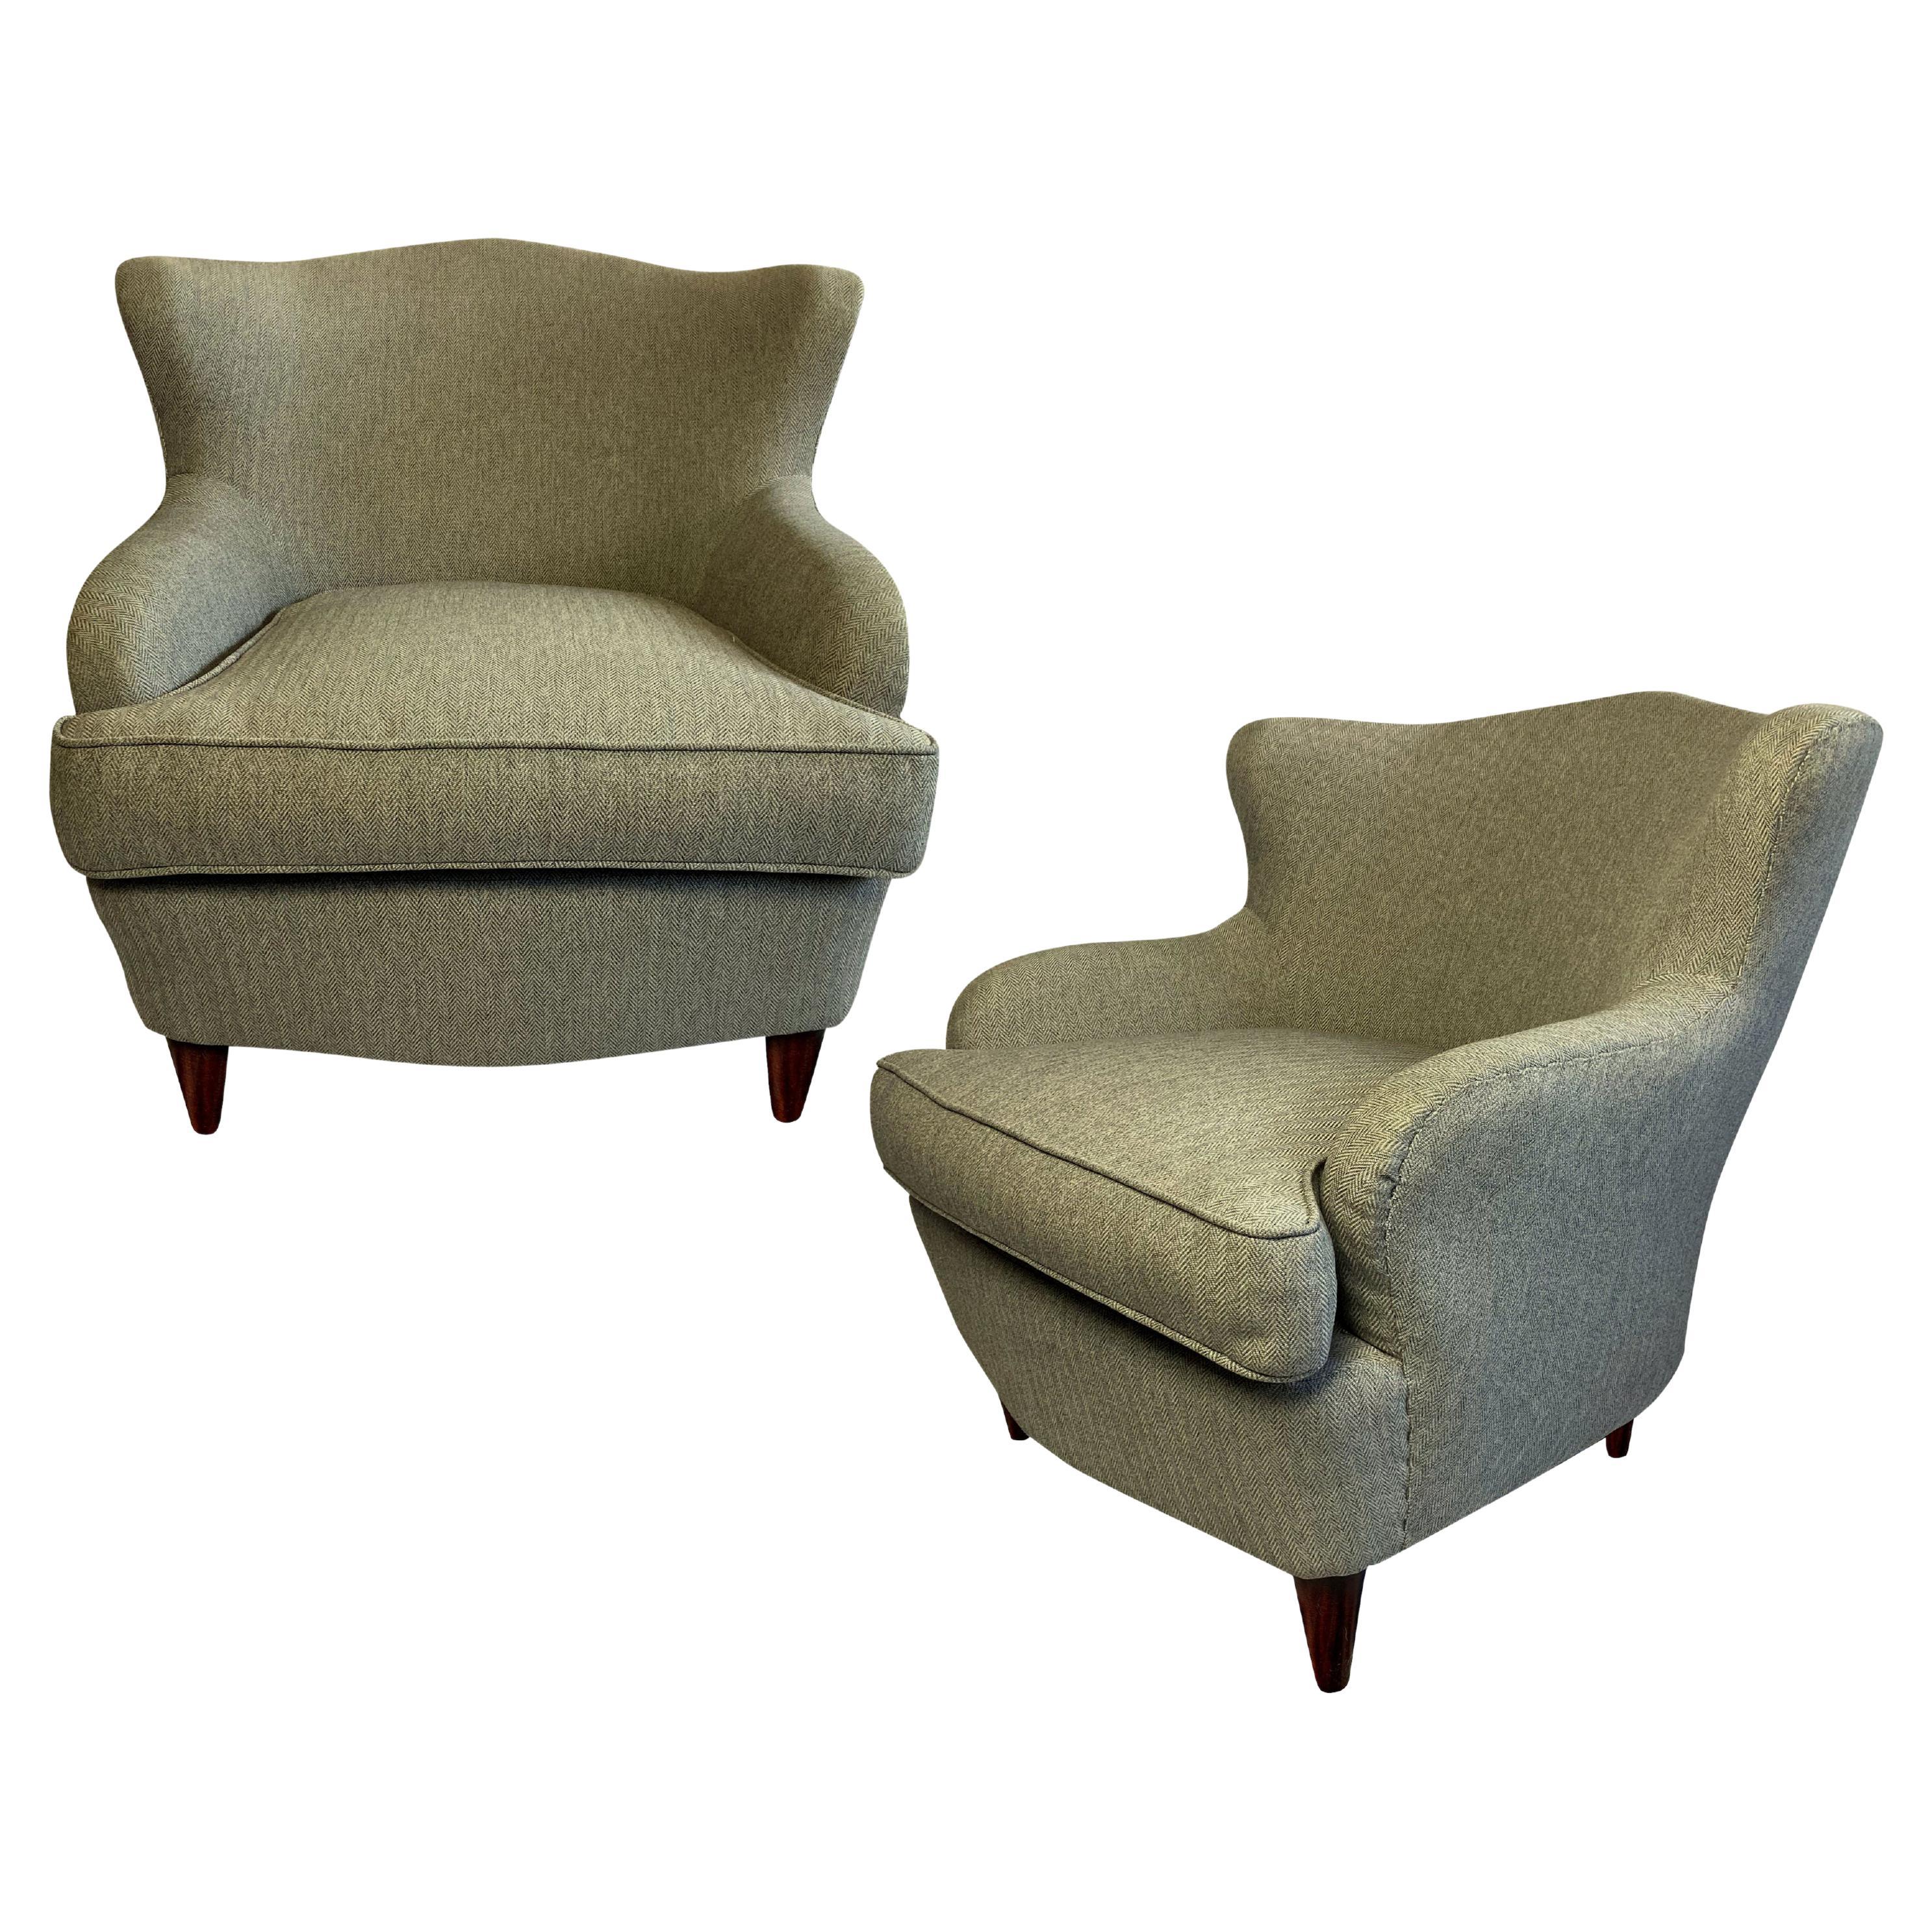 Pair of Cocktail Chairs by ISA